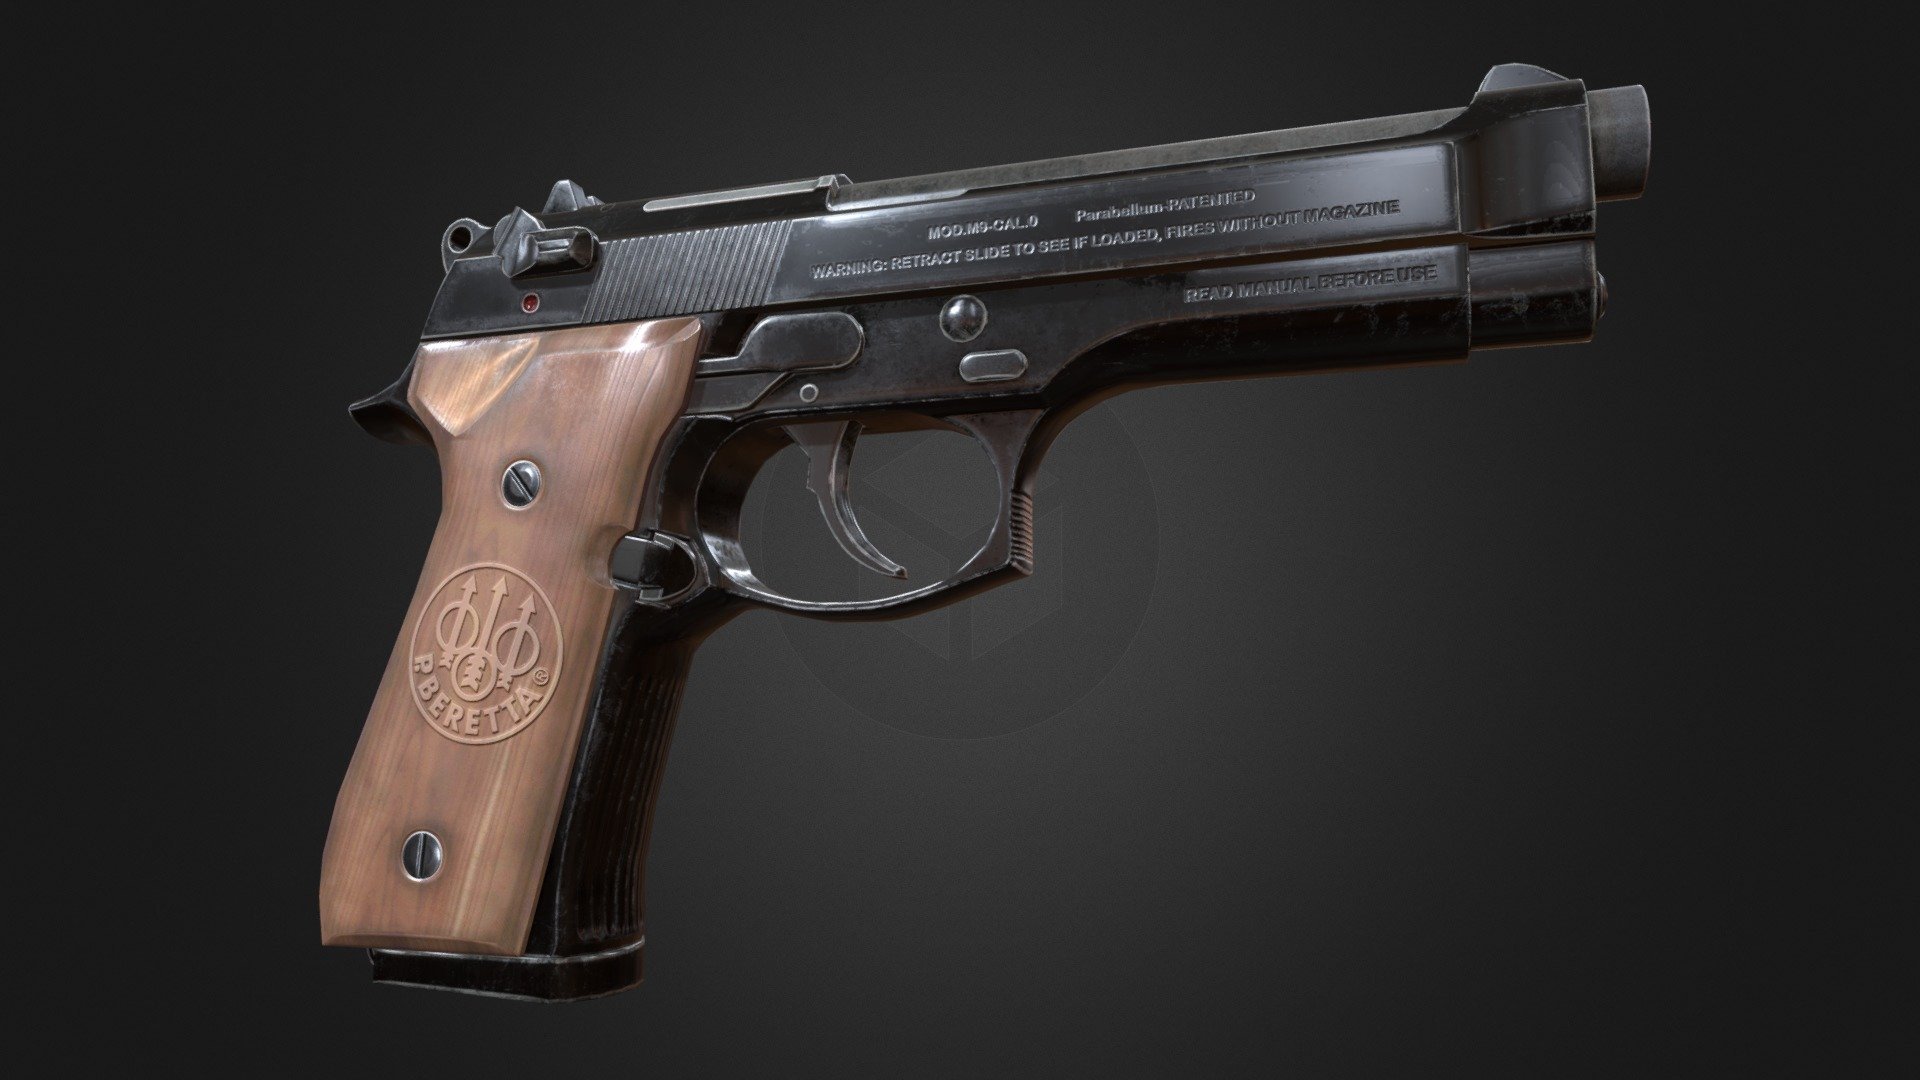 Beretta M9 Semiautomatic Pistol PBR is an optimized model with excellent texturing for best outcome.

The model has an optimized low poly mesh with the greatest possible number of simplifications that do not affect photo-realism but can help to simplify it, thus lightening your scene and allowing for using this model in real-time 3d applications.

In this product, all objects are ERROR-FREE. All LEGAL Geometry. Subdivisions are not required for this product. Real-world accurate model.


Format Type



3ds Max 2017 (Default Physical PBR Shader)

FBX

OBJ

3DS


Texture Type
1 material used. 1 set of:




Albedo

Metalness

Roughness

Normal

AO

You might need to re-assign textures map to model in your relevant software

You might need to flip green channel of Normal map according to your relevant softwar - Beretta M9 Semiautomatic Pistol PBR - Buy Royalty Free 3D model by 3d Assets Gun (@3dassetsgun) 3d model